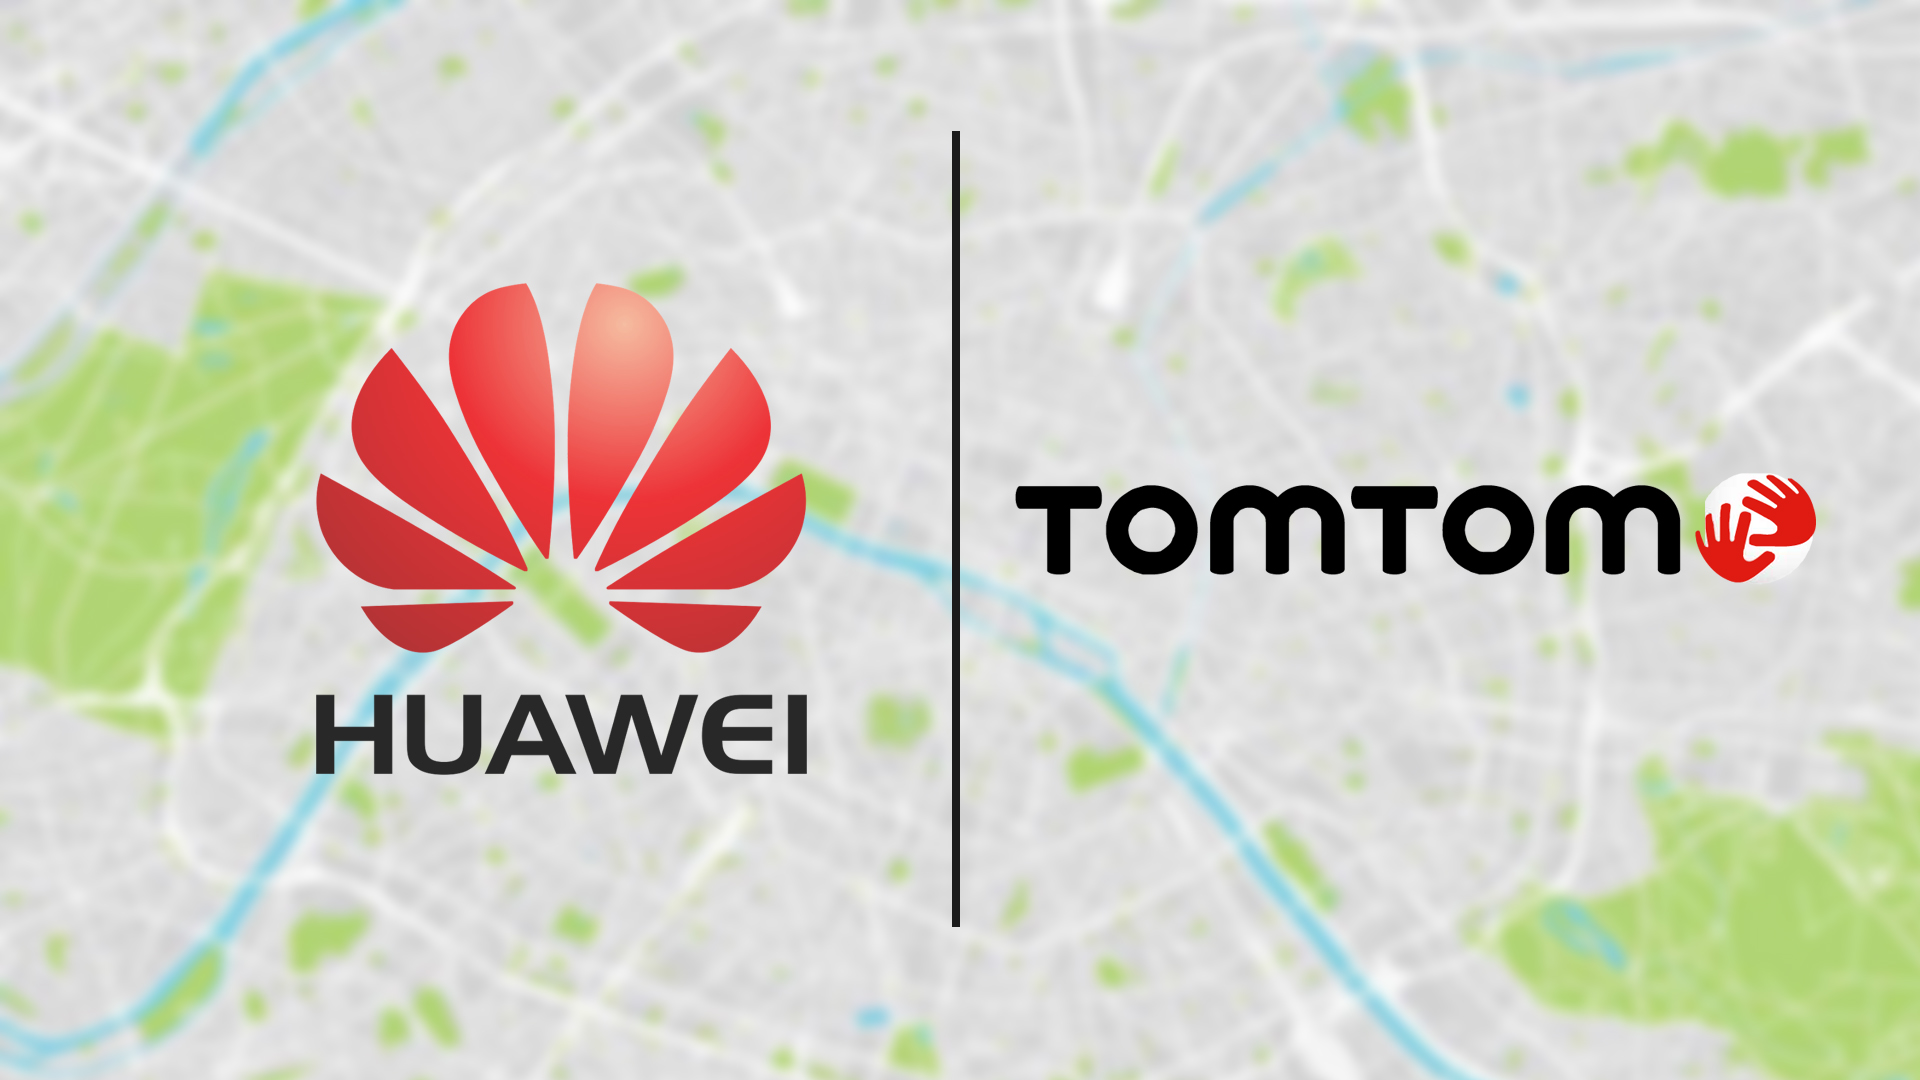 Huawei Teams Up With TomTom For Map Services